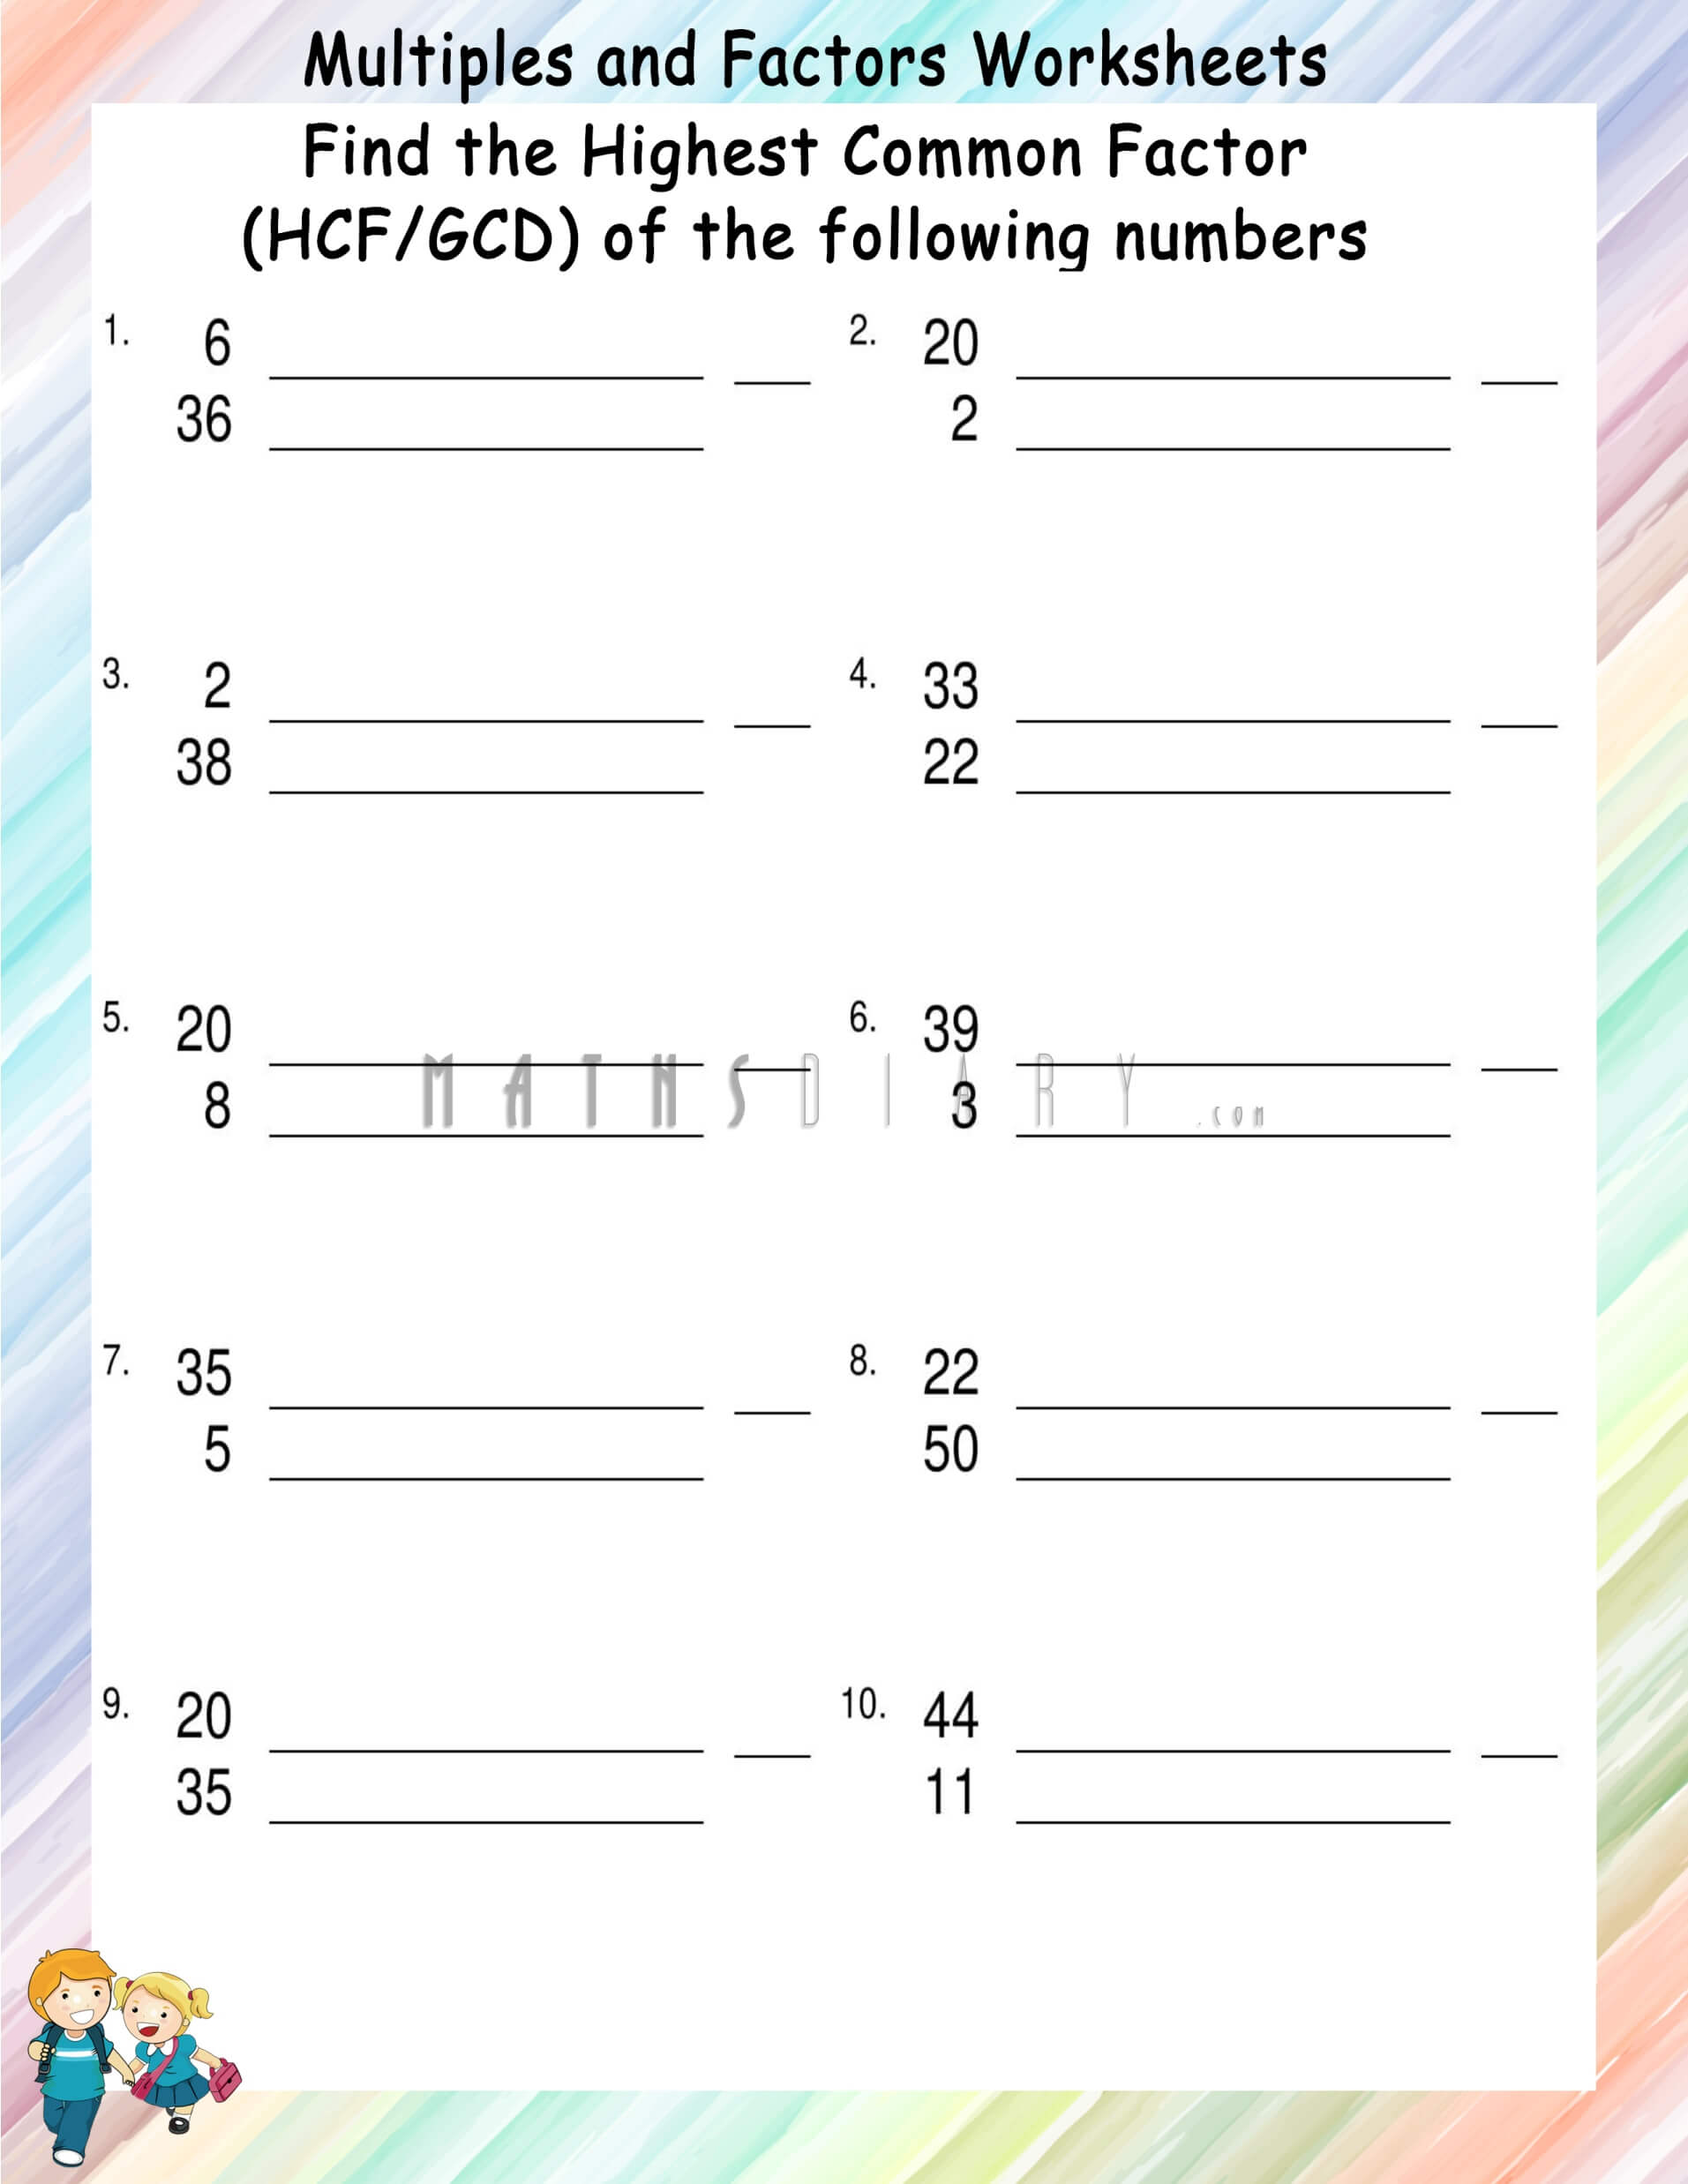 grade-5-factoring-worksheets-greatest-common-factor-of-two-numbers-k5-learning-greatest-common